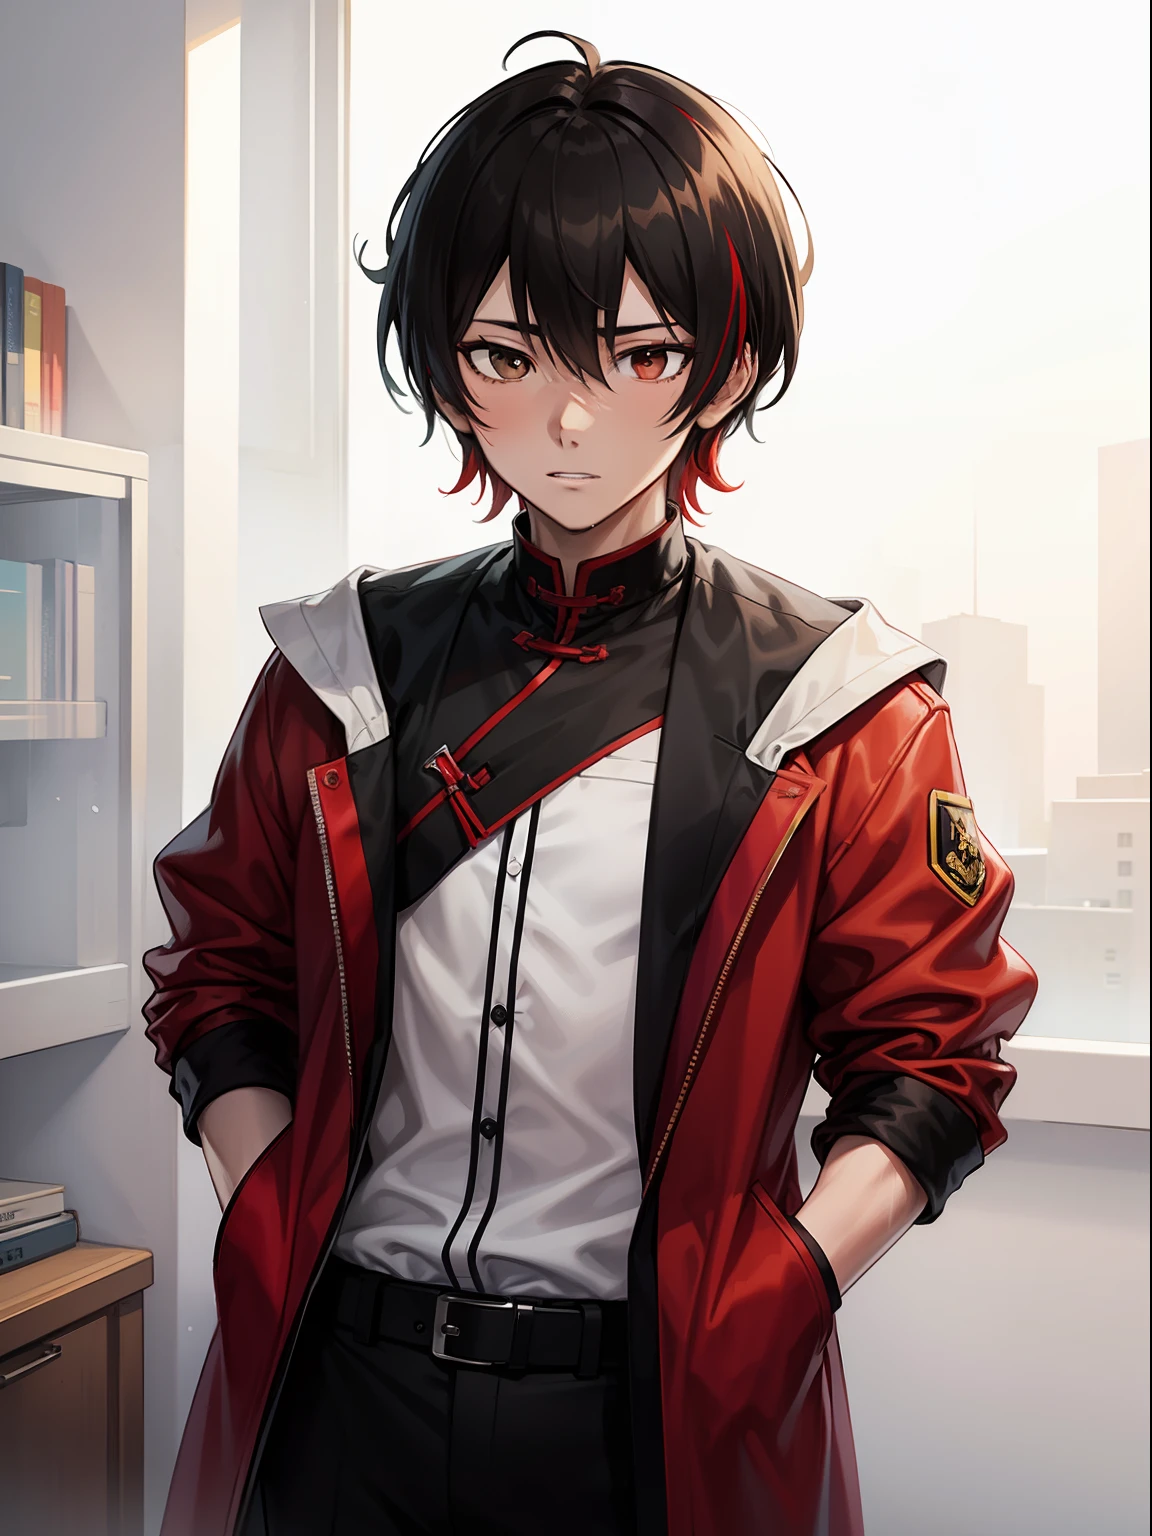 Chinese young man detective with average height, pale skin, black hair, brown eyes, and red streaked hair, in a highly detailed anime style artwork.